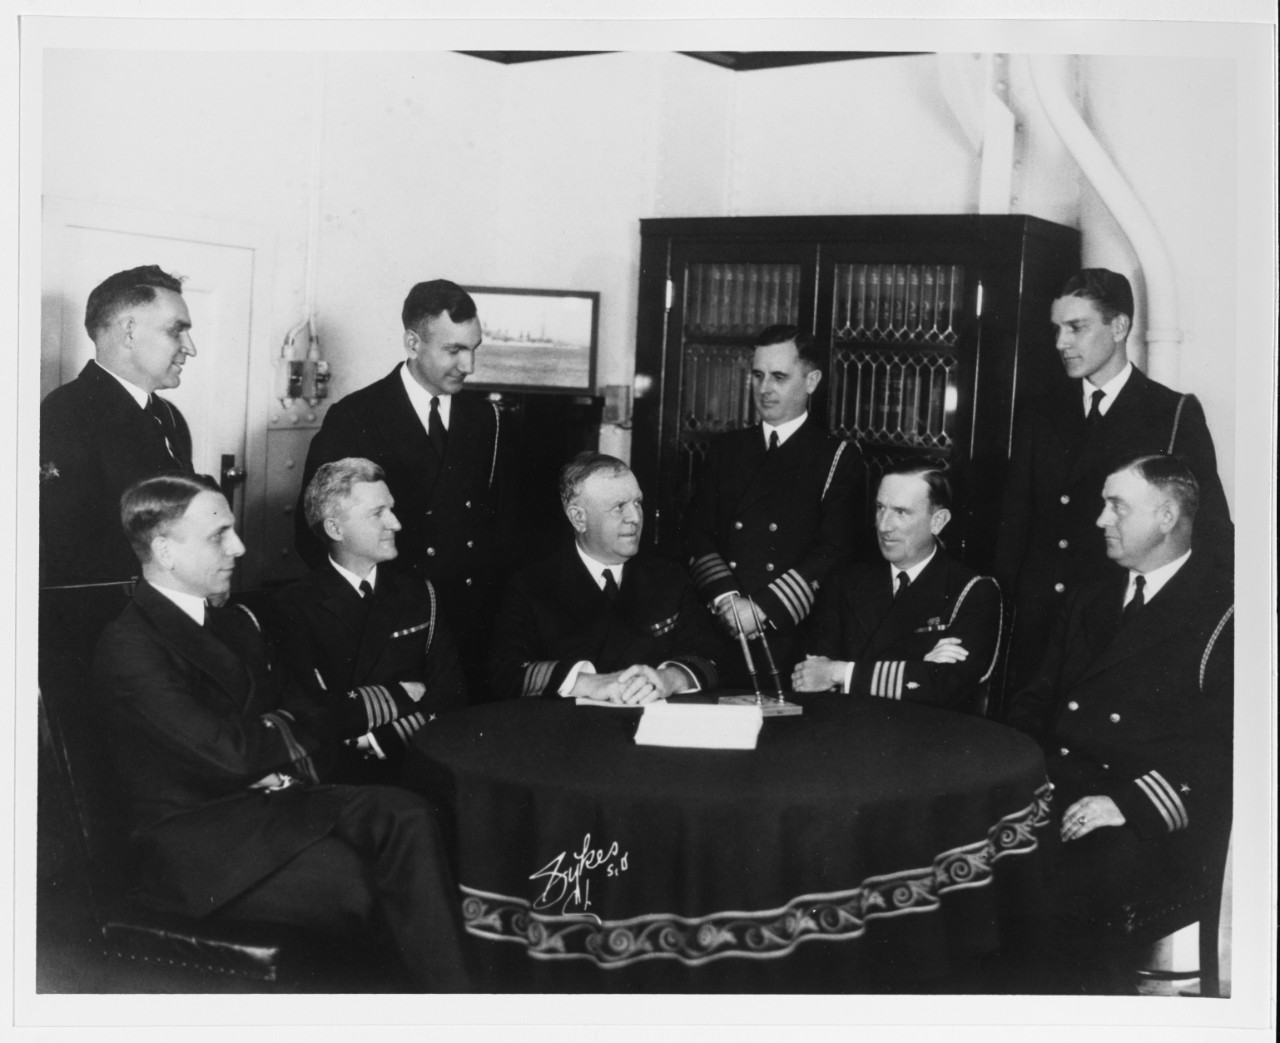 Rear Admiral Thomas J. Senn with Members of his Staff on Board USS OMAHA (CL-4)